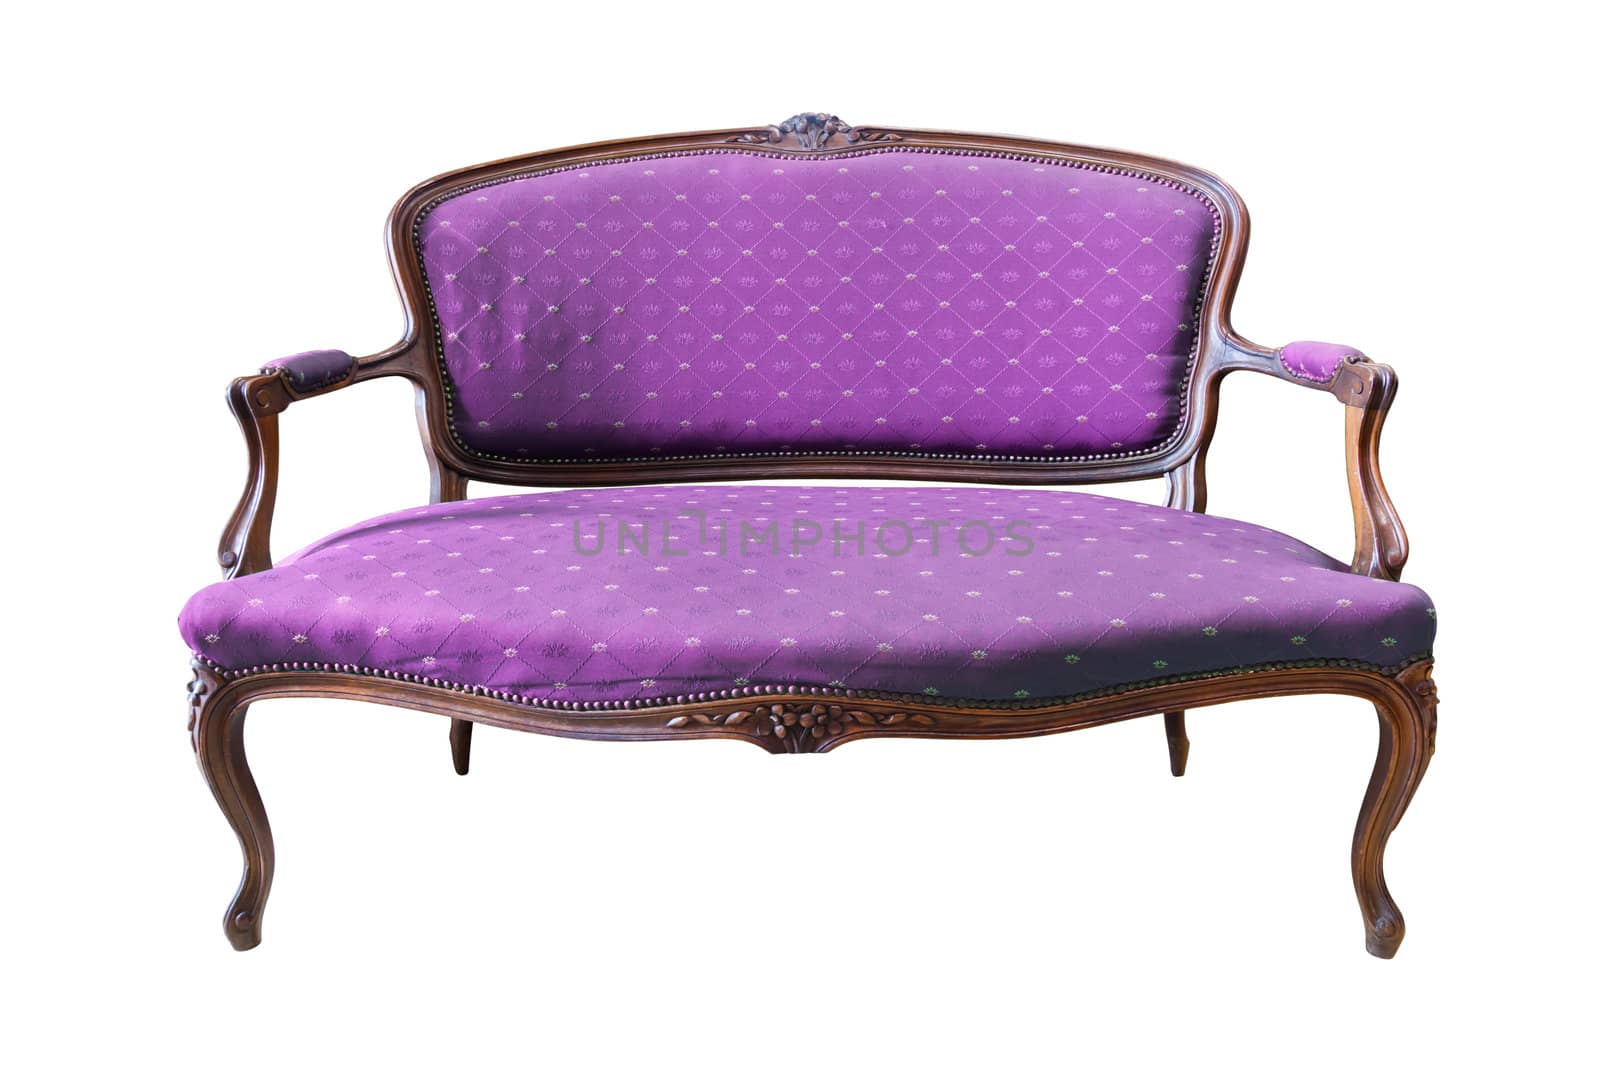 vintage purple luxury armchair isolated with clipping path by tungphoto